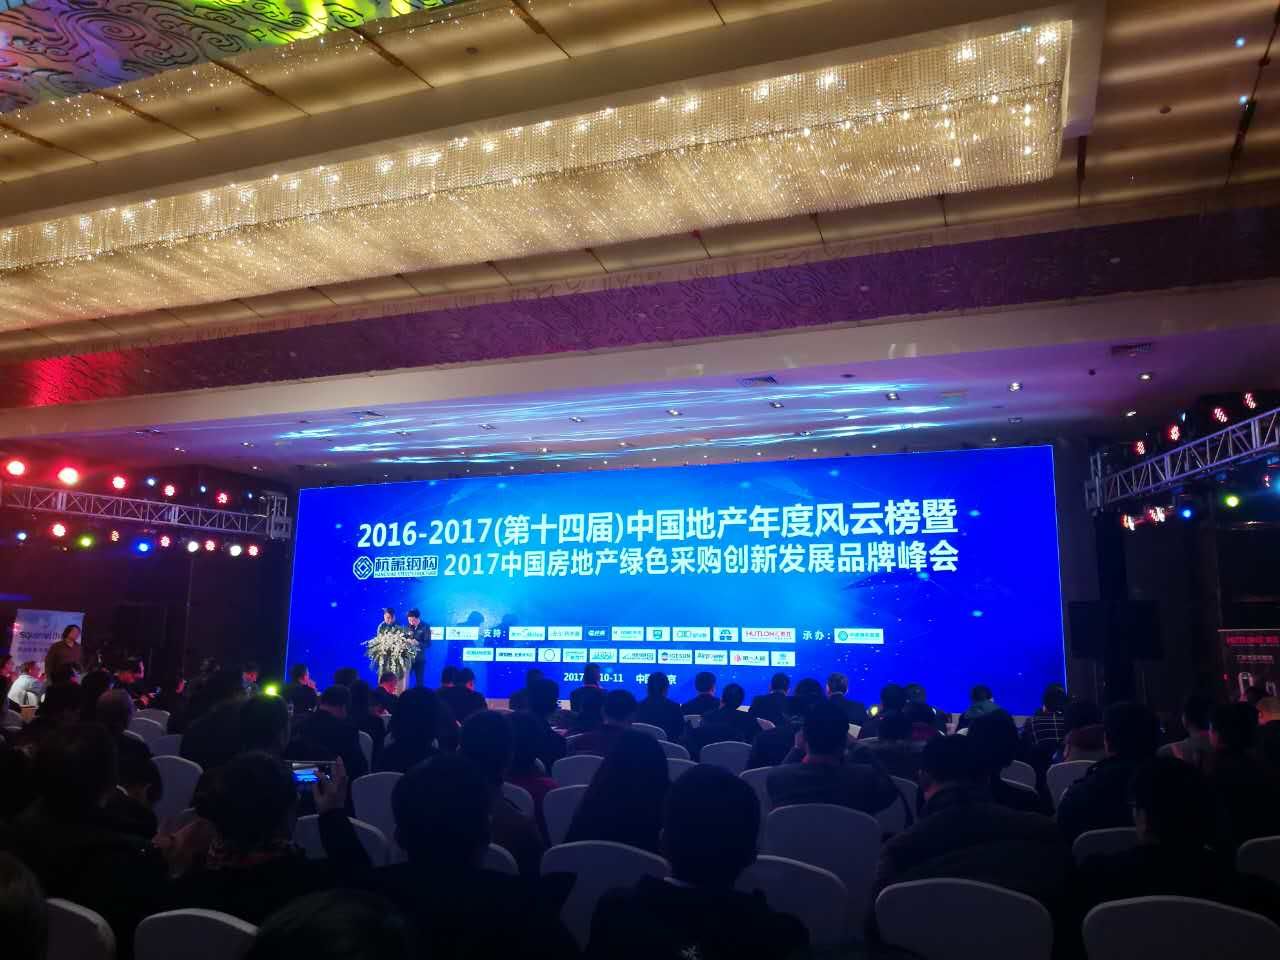 Kemet was invited to participate in the 14th China Real Estate Annual Billboard Awards Ceremony 2016-2017 and China Real Estate Green Procurement Innovation and Development Brand Summit